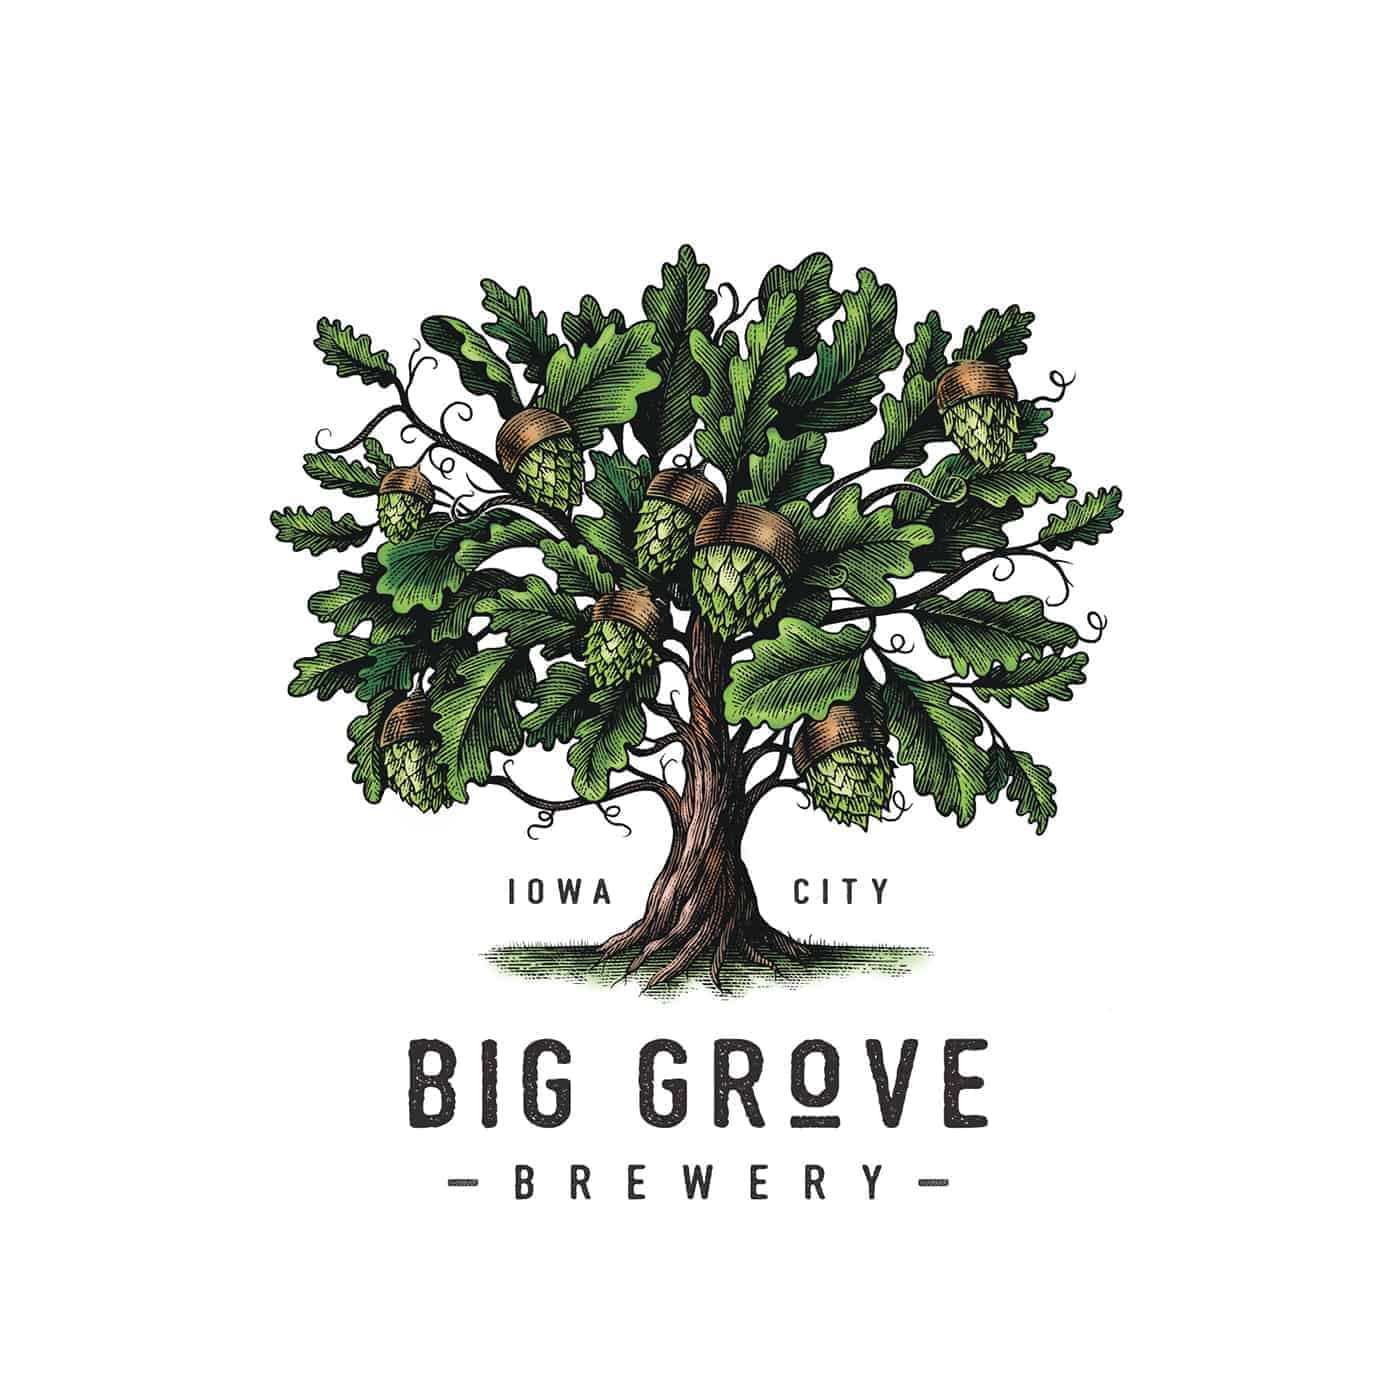 Big Grove Brewery Logomark Illustrated by Steven Noble